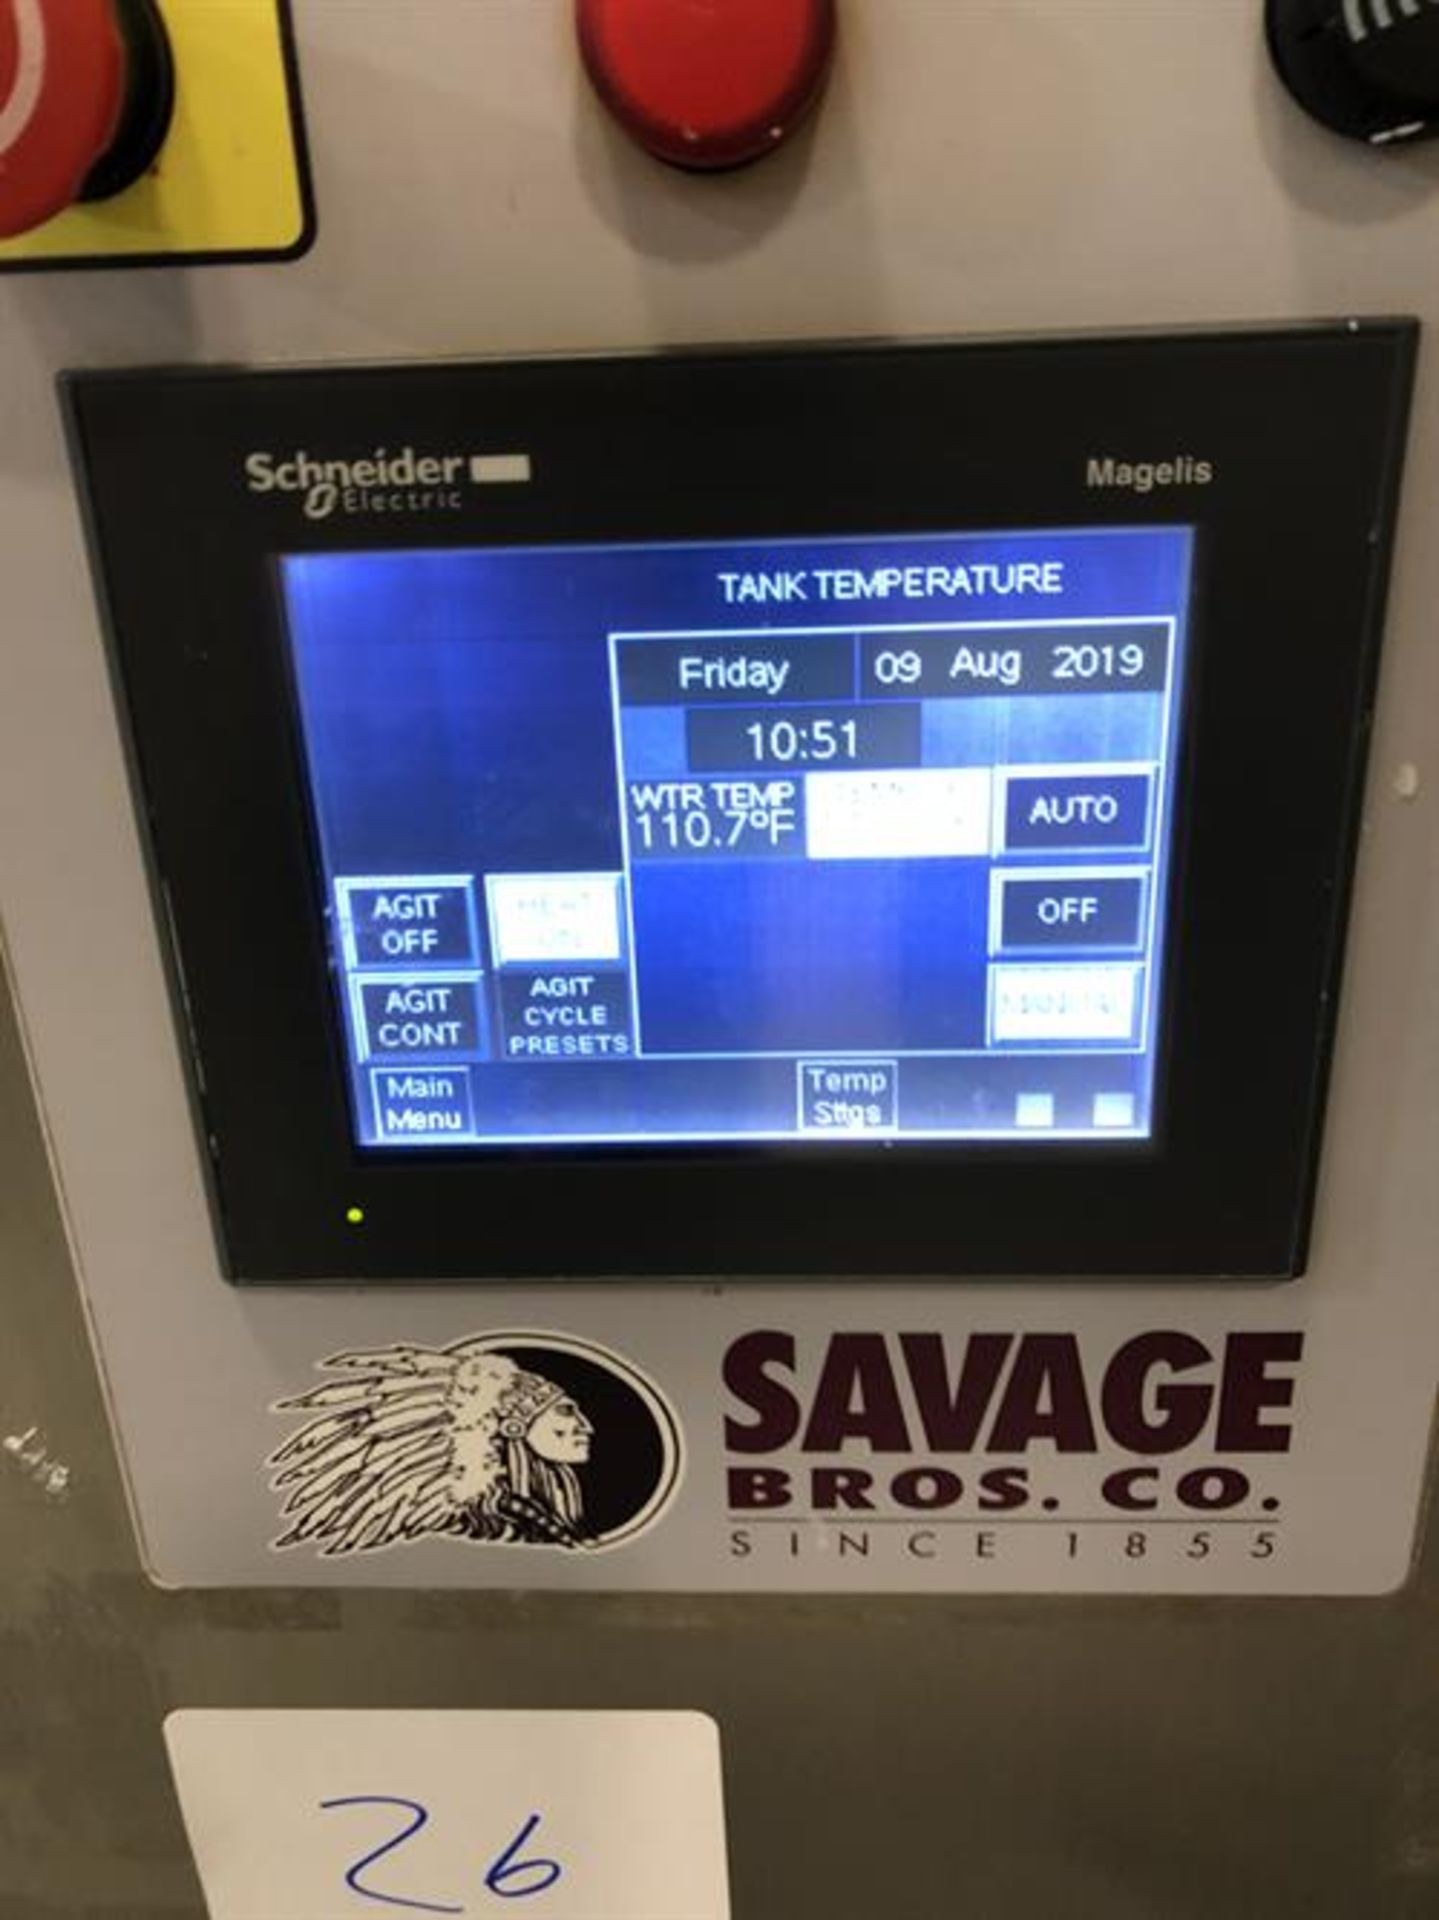 Savage 1250-lb Stainless Steel Choclate Melter - model 0974-40, with PLC touchscreen controls, - - Image 4 of 7